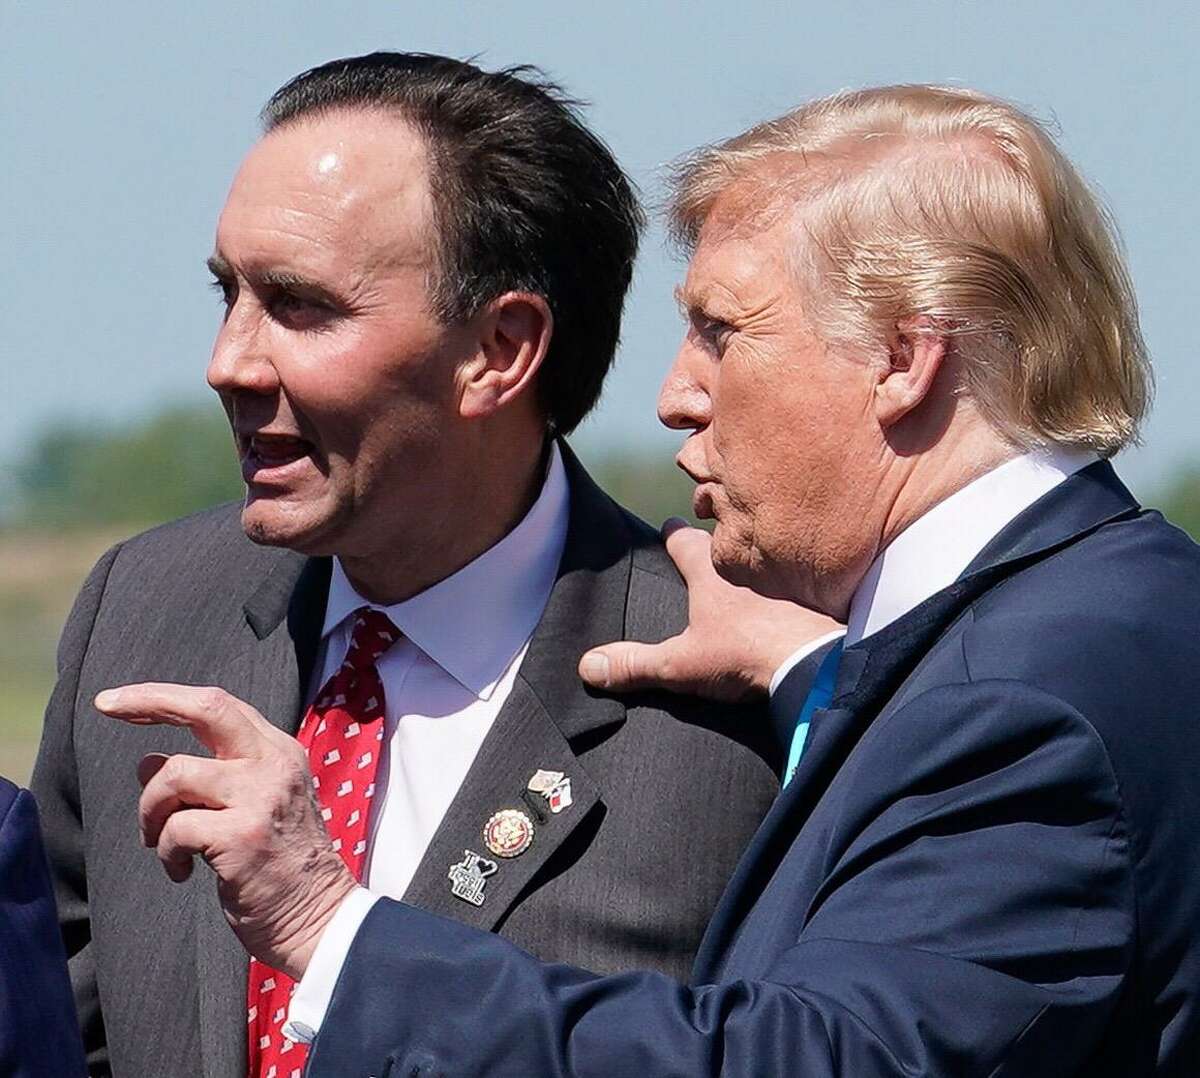 U.S. Rep. Pete Olson and President Donald Trump talk at Ellington Field, Wednesday, April 10, 2019 in Houston. Trump is scheduled to speak and sign executive orders on energy and infrastructure during his visit to the International Union of Operating Engineers (IUOE) International Training Center in Crosby.